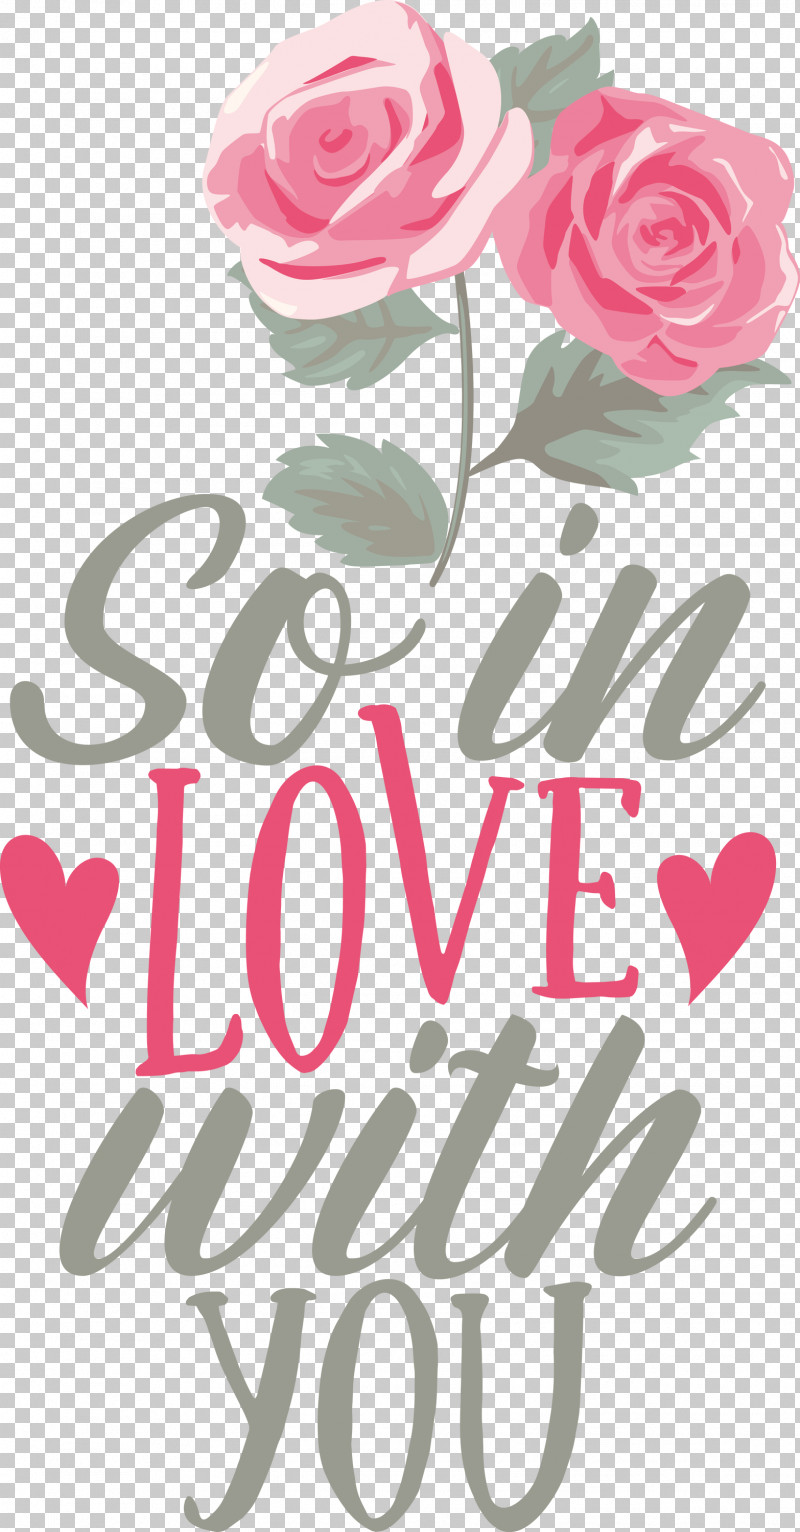 So In Love With You Valentines Day Valentine PNG, Clipart, Cut Flowers, Floral Design, Flower, Garden, Garden Roses Free PNG Download